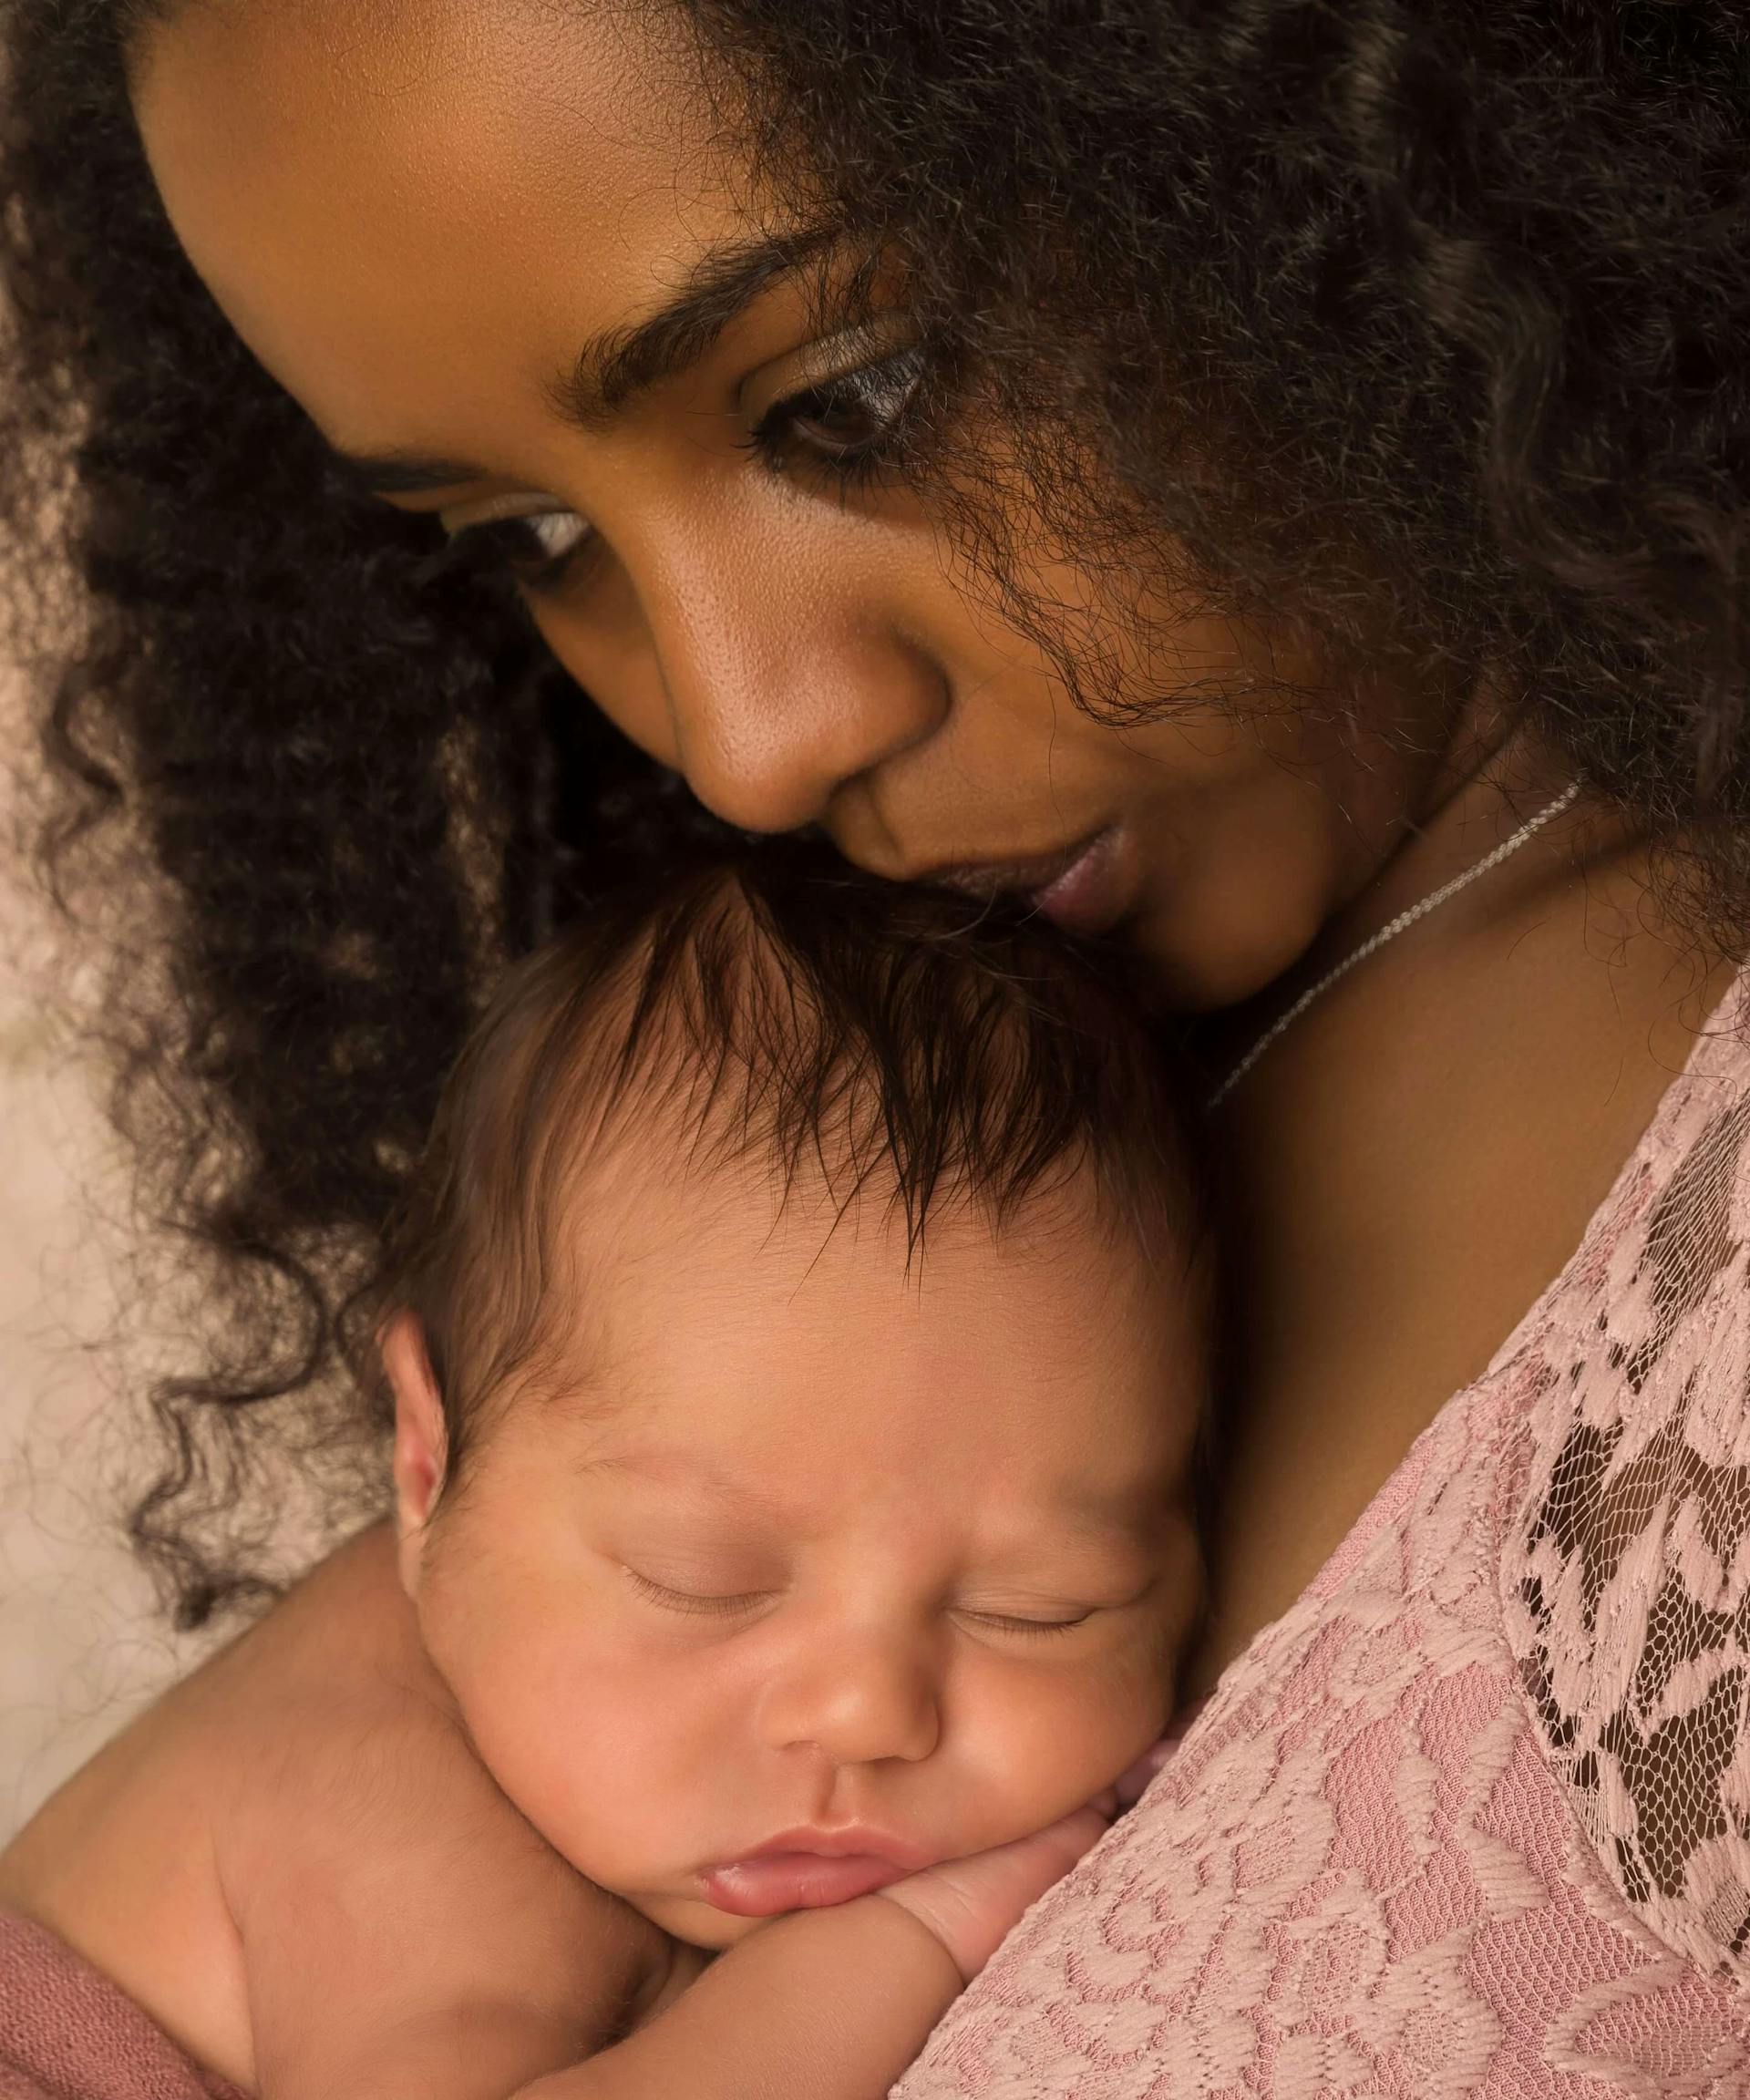 Postpartum Depression Made Me Think I Was A Bad Mom Until I Realized How Common It Was